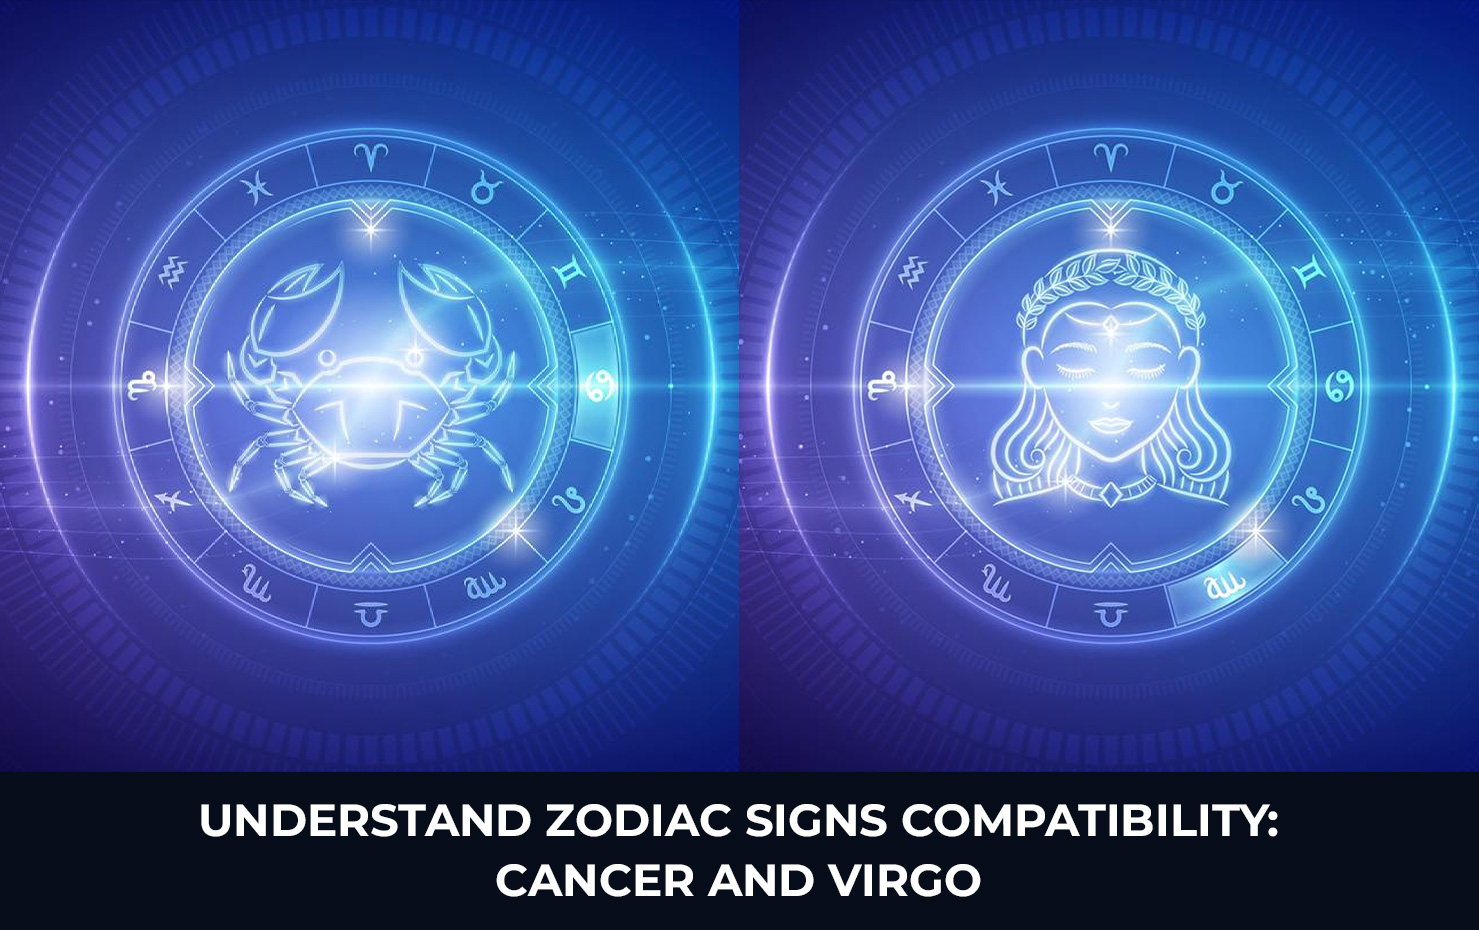 Understand Zodiac Signs Compatibility: Cancer and Virgo